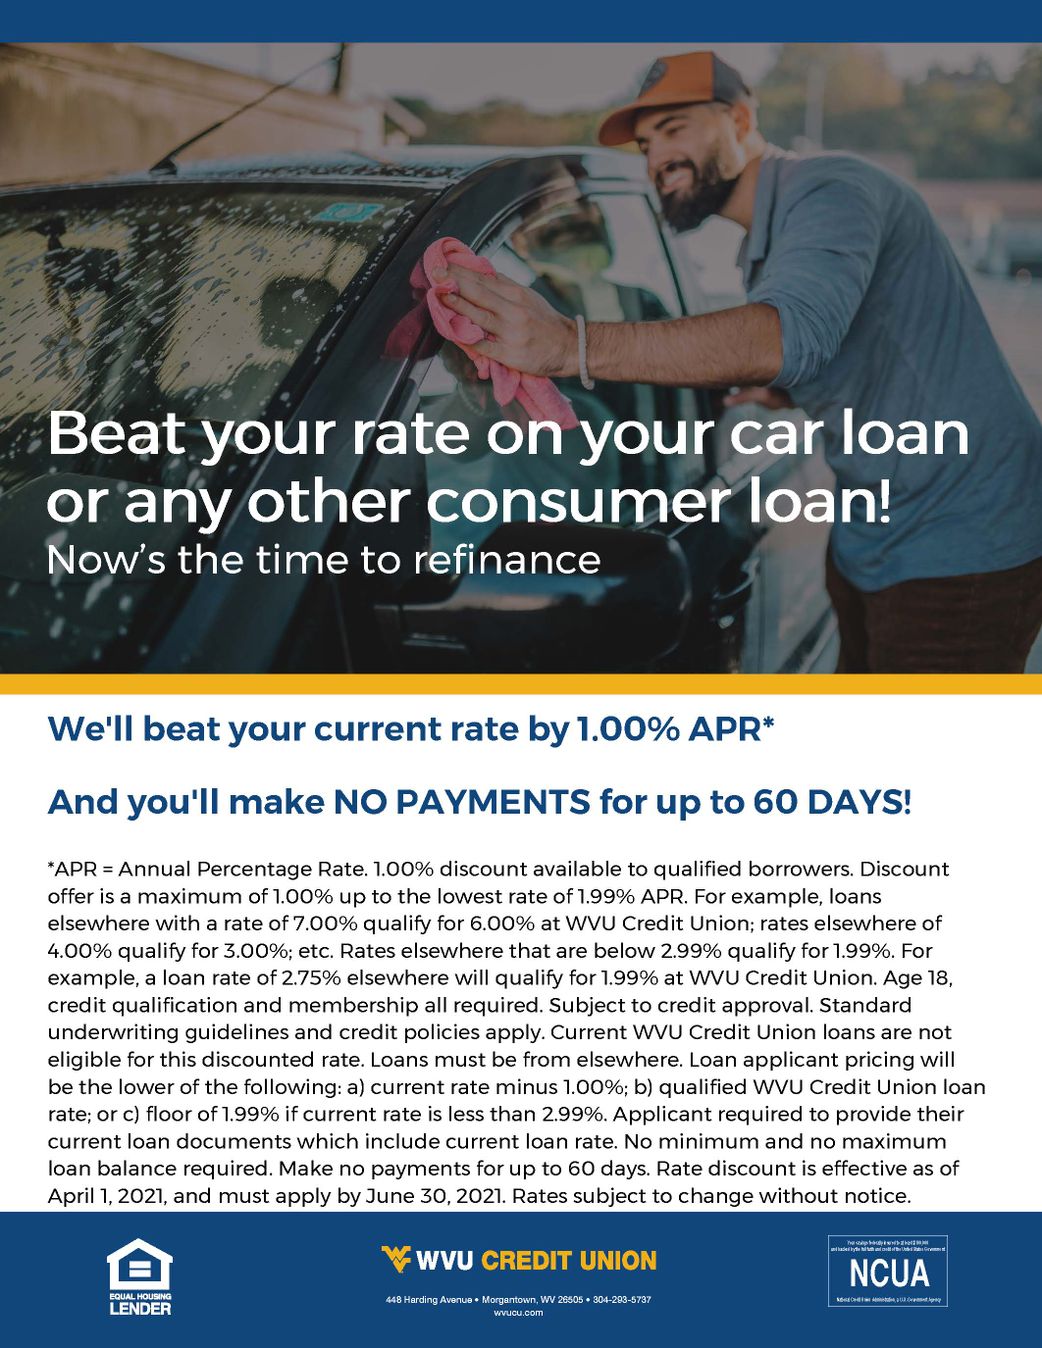 Beat Your Rate on consumer loan